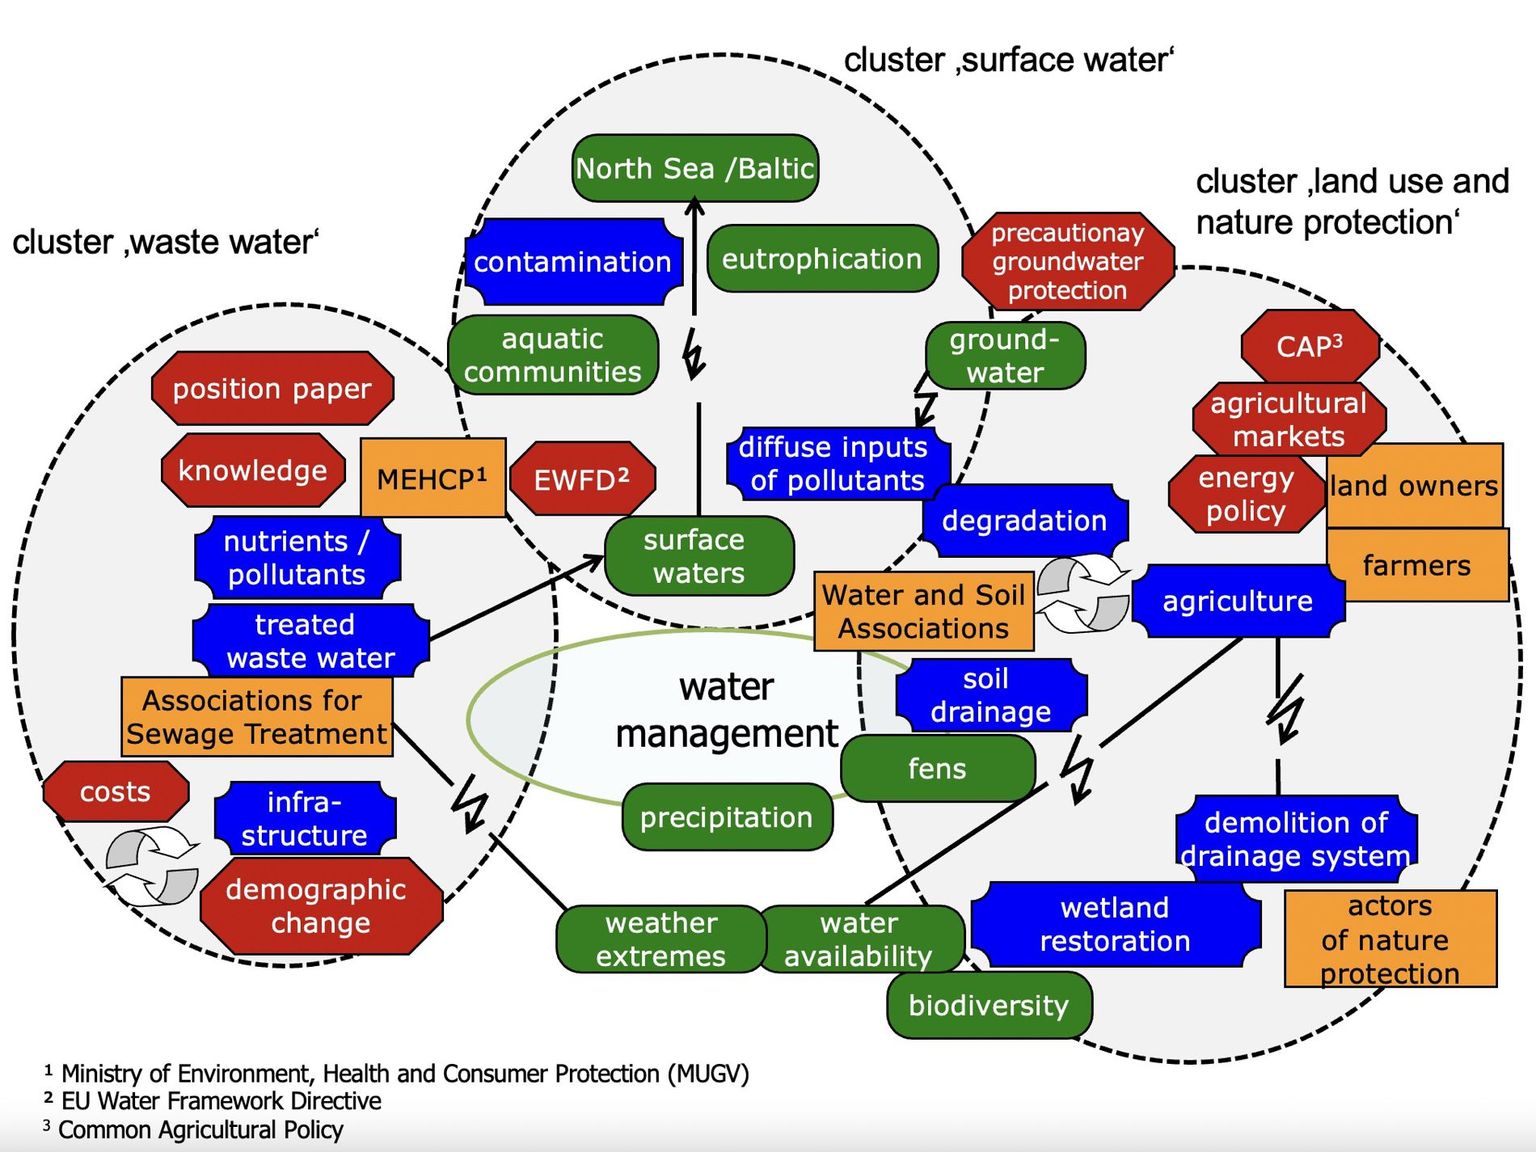 Figure 1: Constellation Analysis for water and land management of rural fenlands